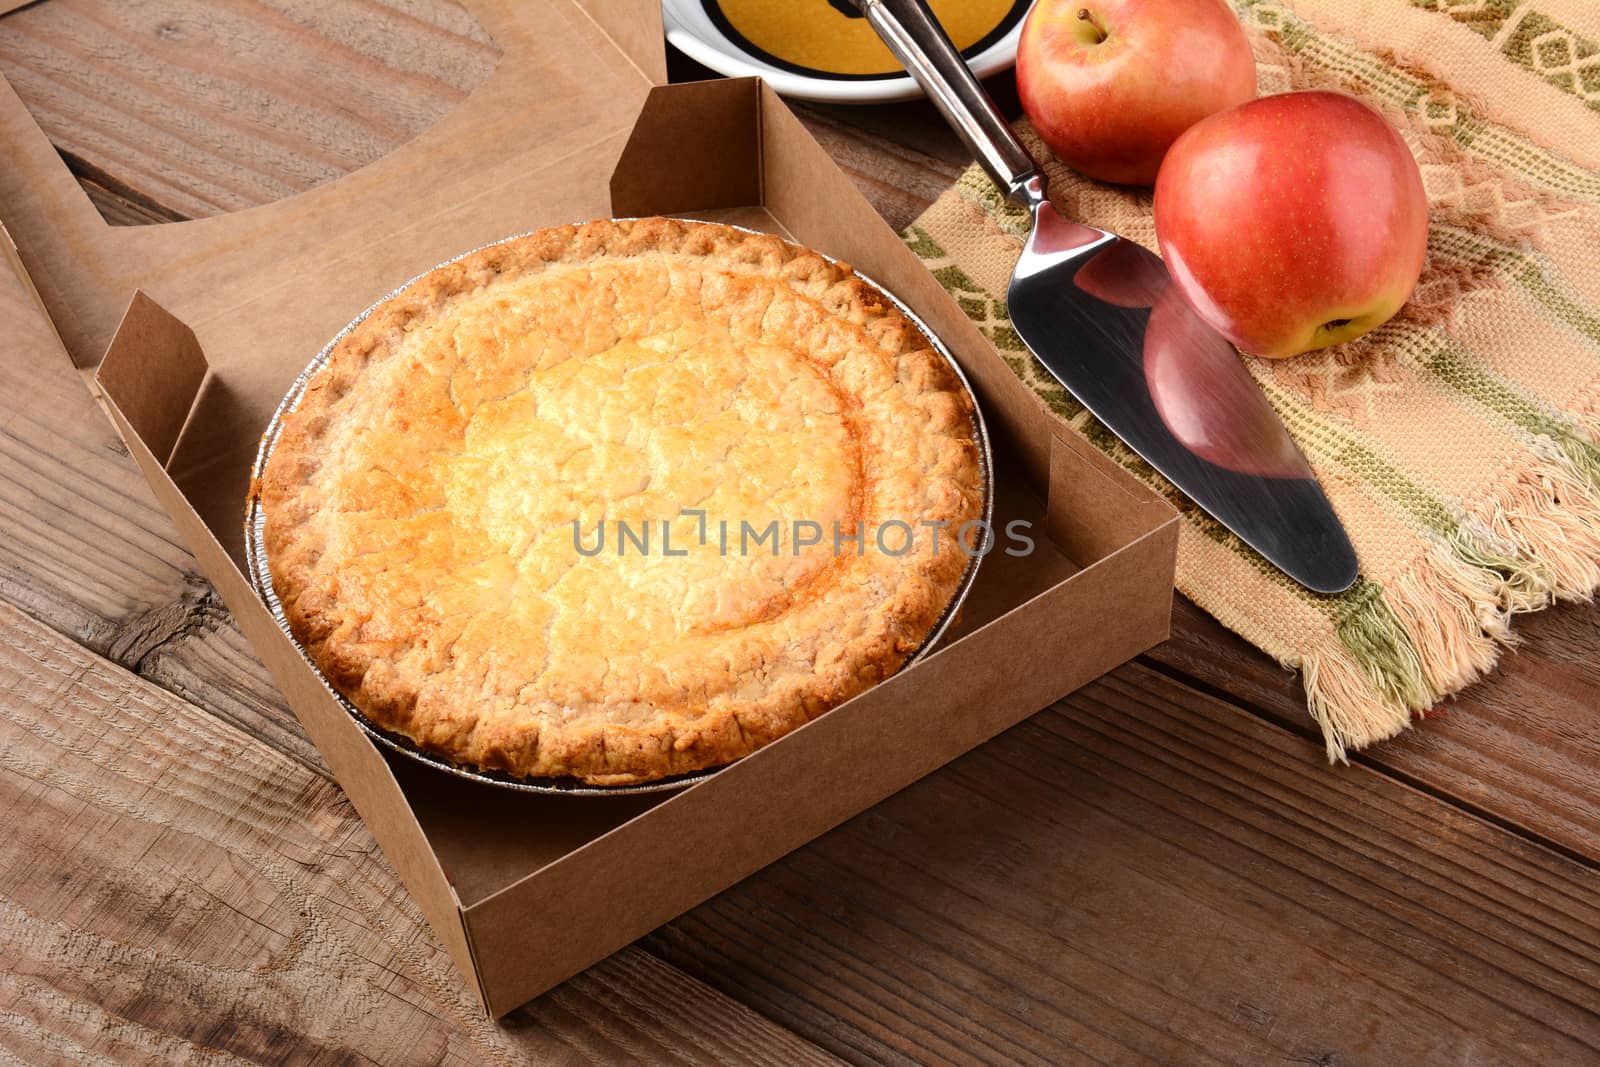 Apple Pie with Fresh Apples on Wood Table by sCukrov